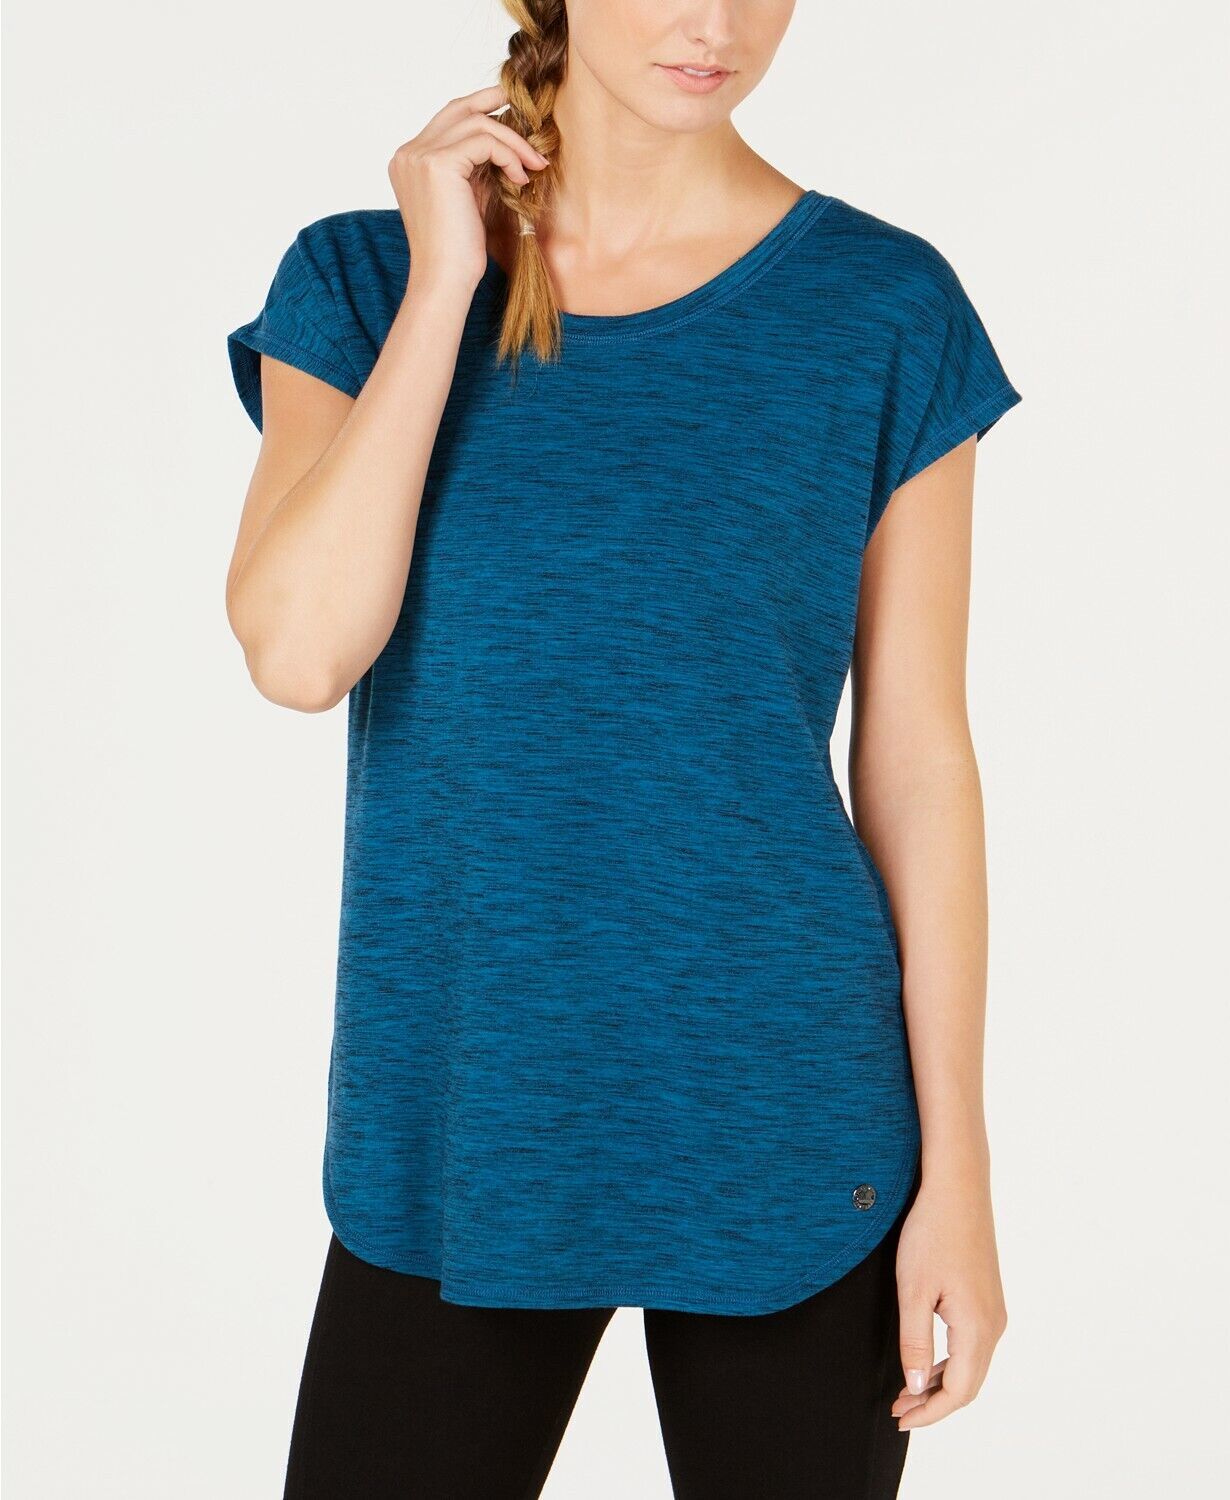 Primary image for 34.50$ Ideology Essential Space-Dyed Lace-Up Back T-Shirt, Color: Teal, Size: XL